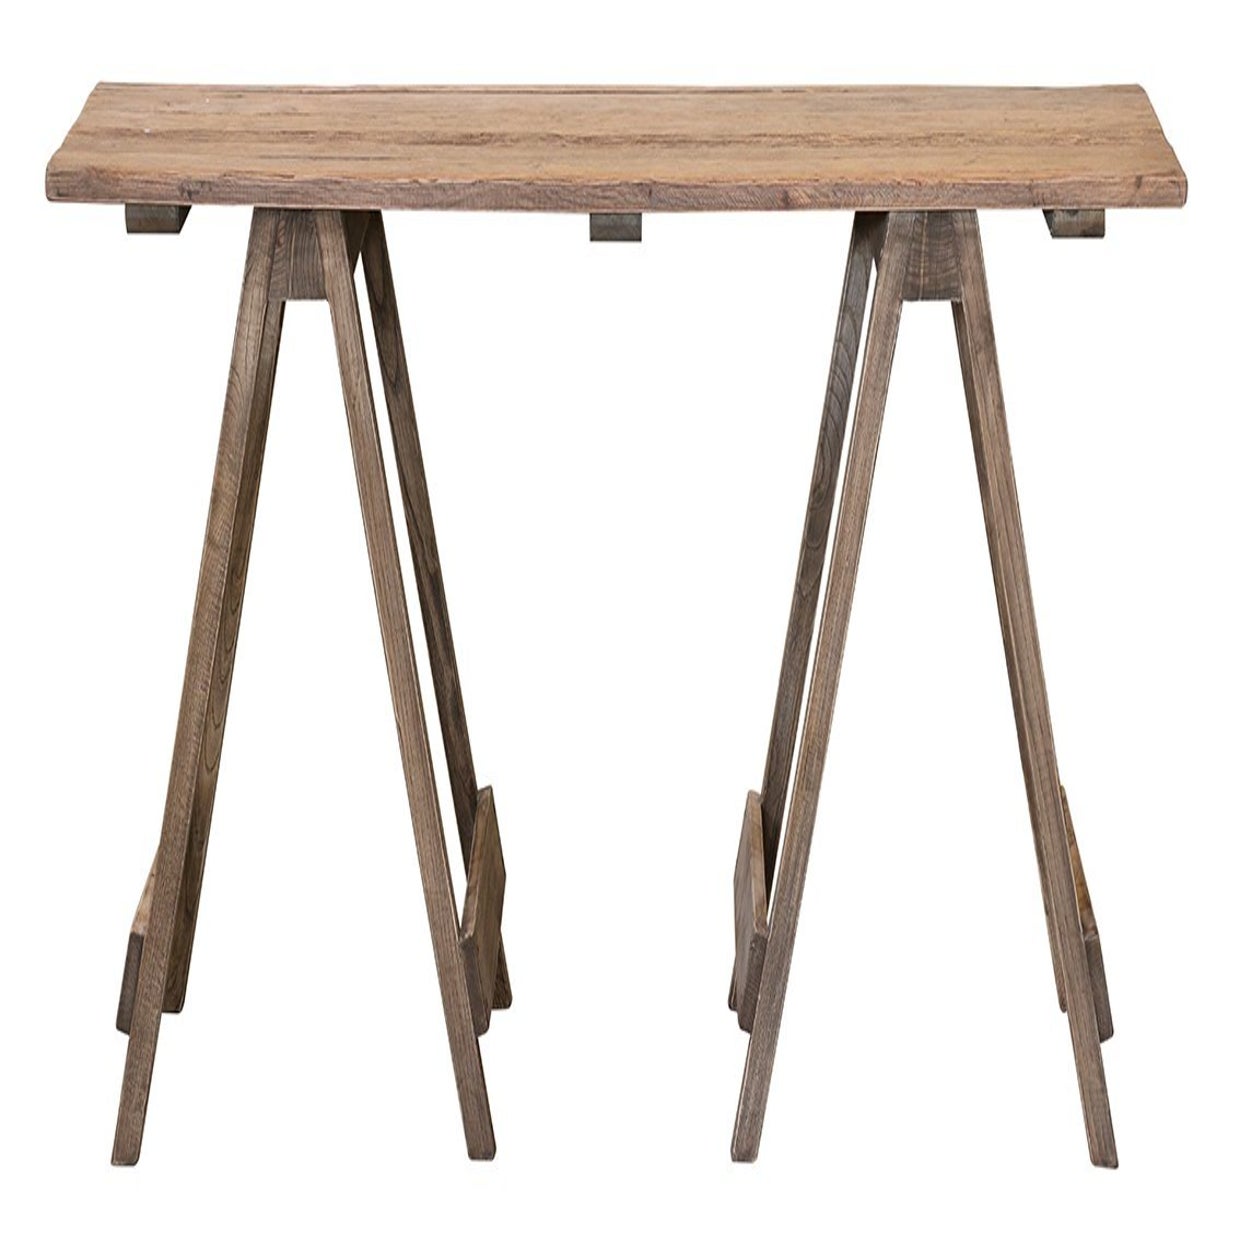 ITALIA RIVIERA TRESTLE TABLE/ DESK WITH NATURAL FINISH IN RECYCLED PINE